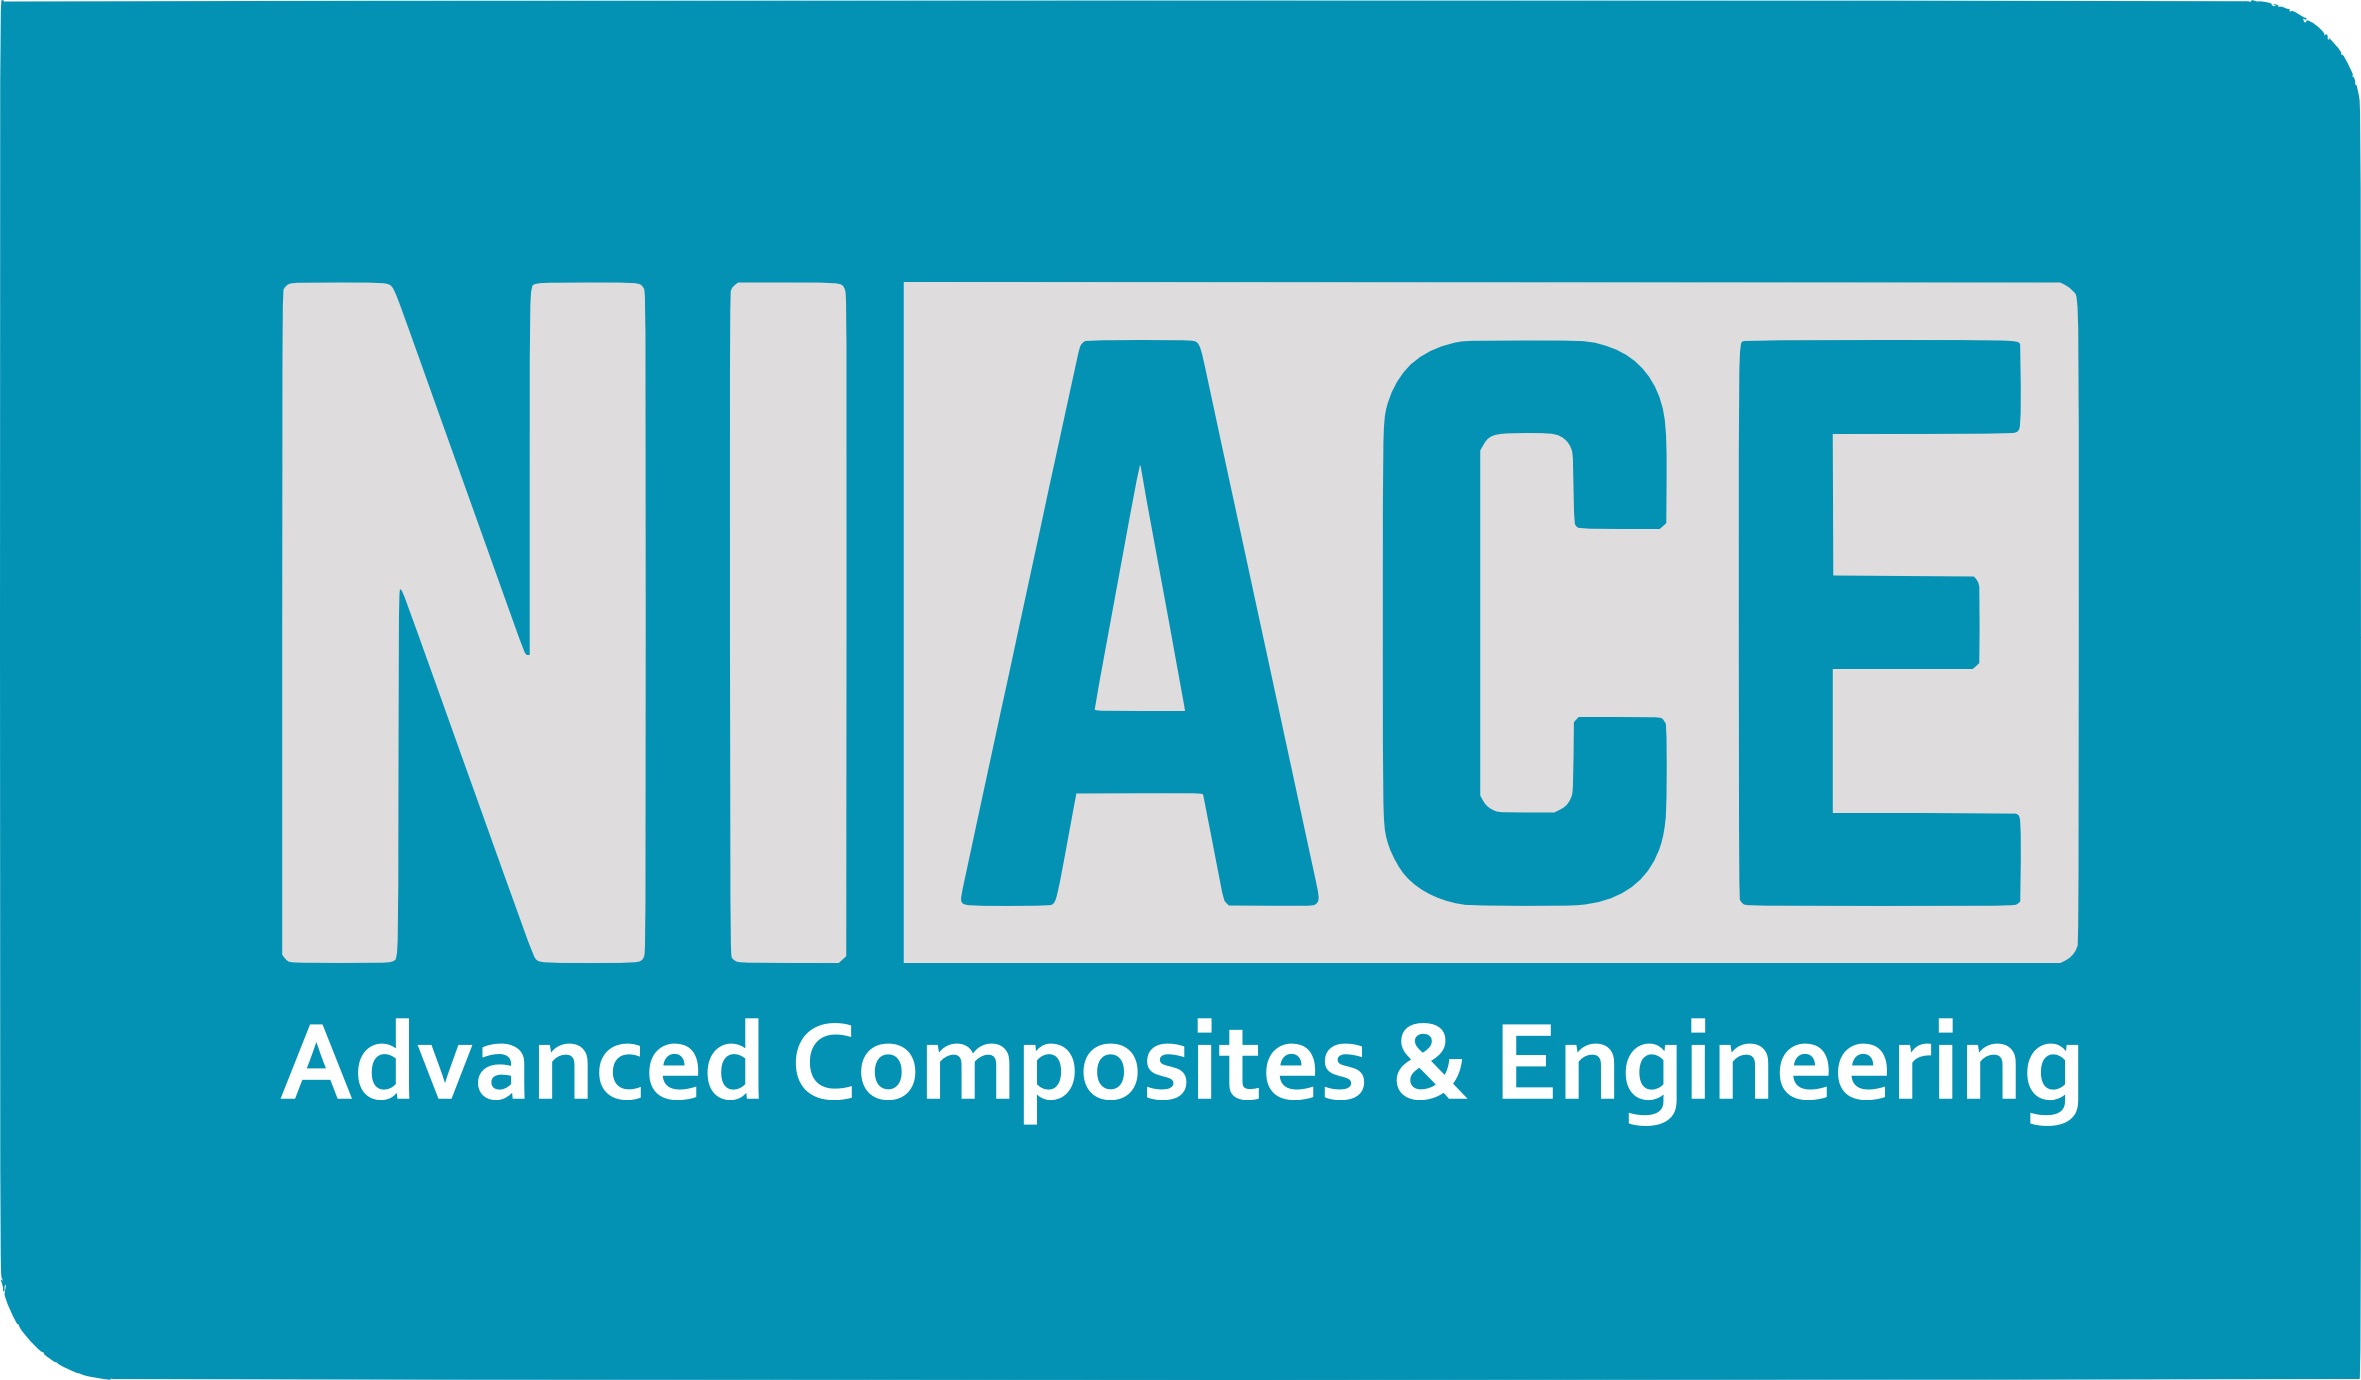 Northern Ireland Advanced Composites and Engineering Centre (NIACE)